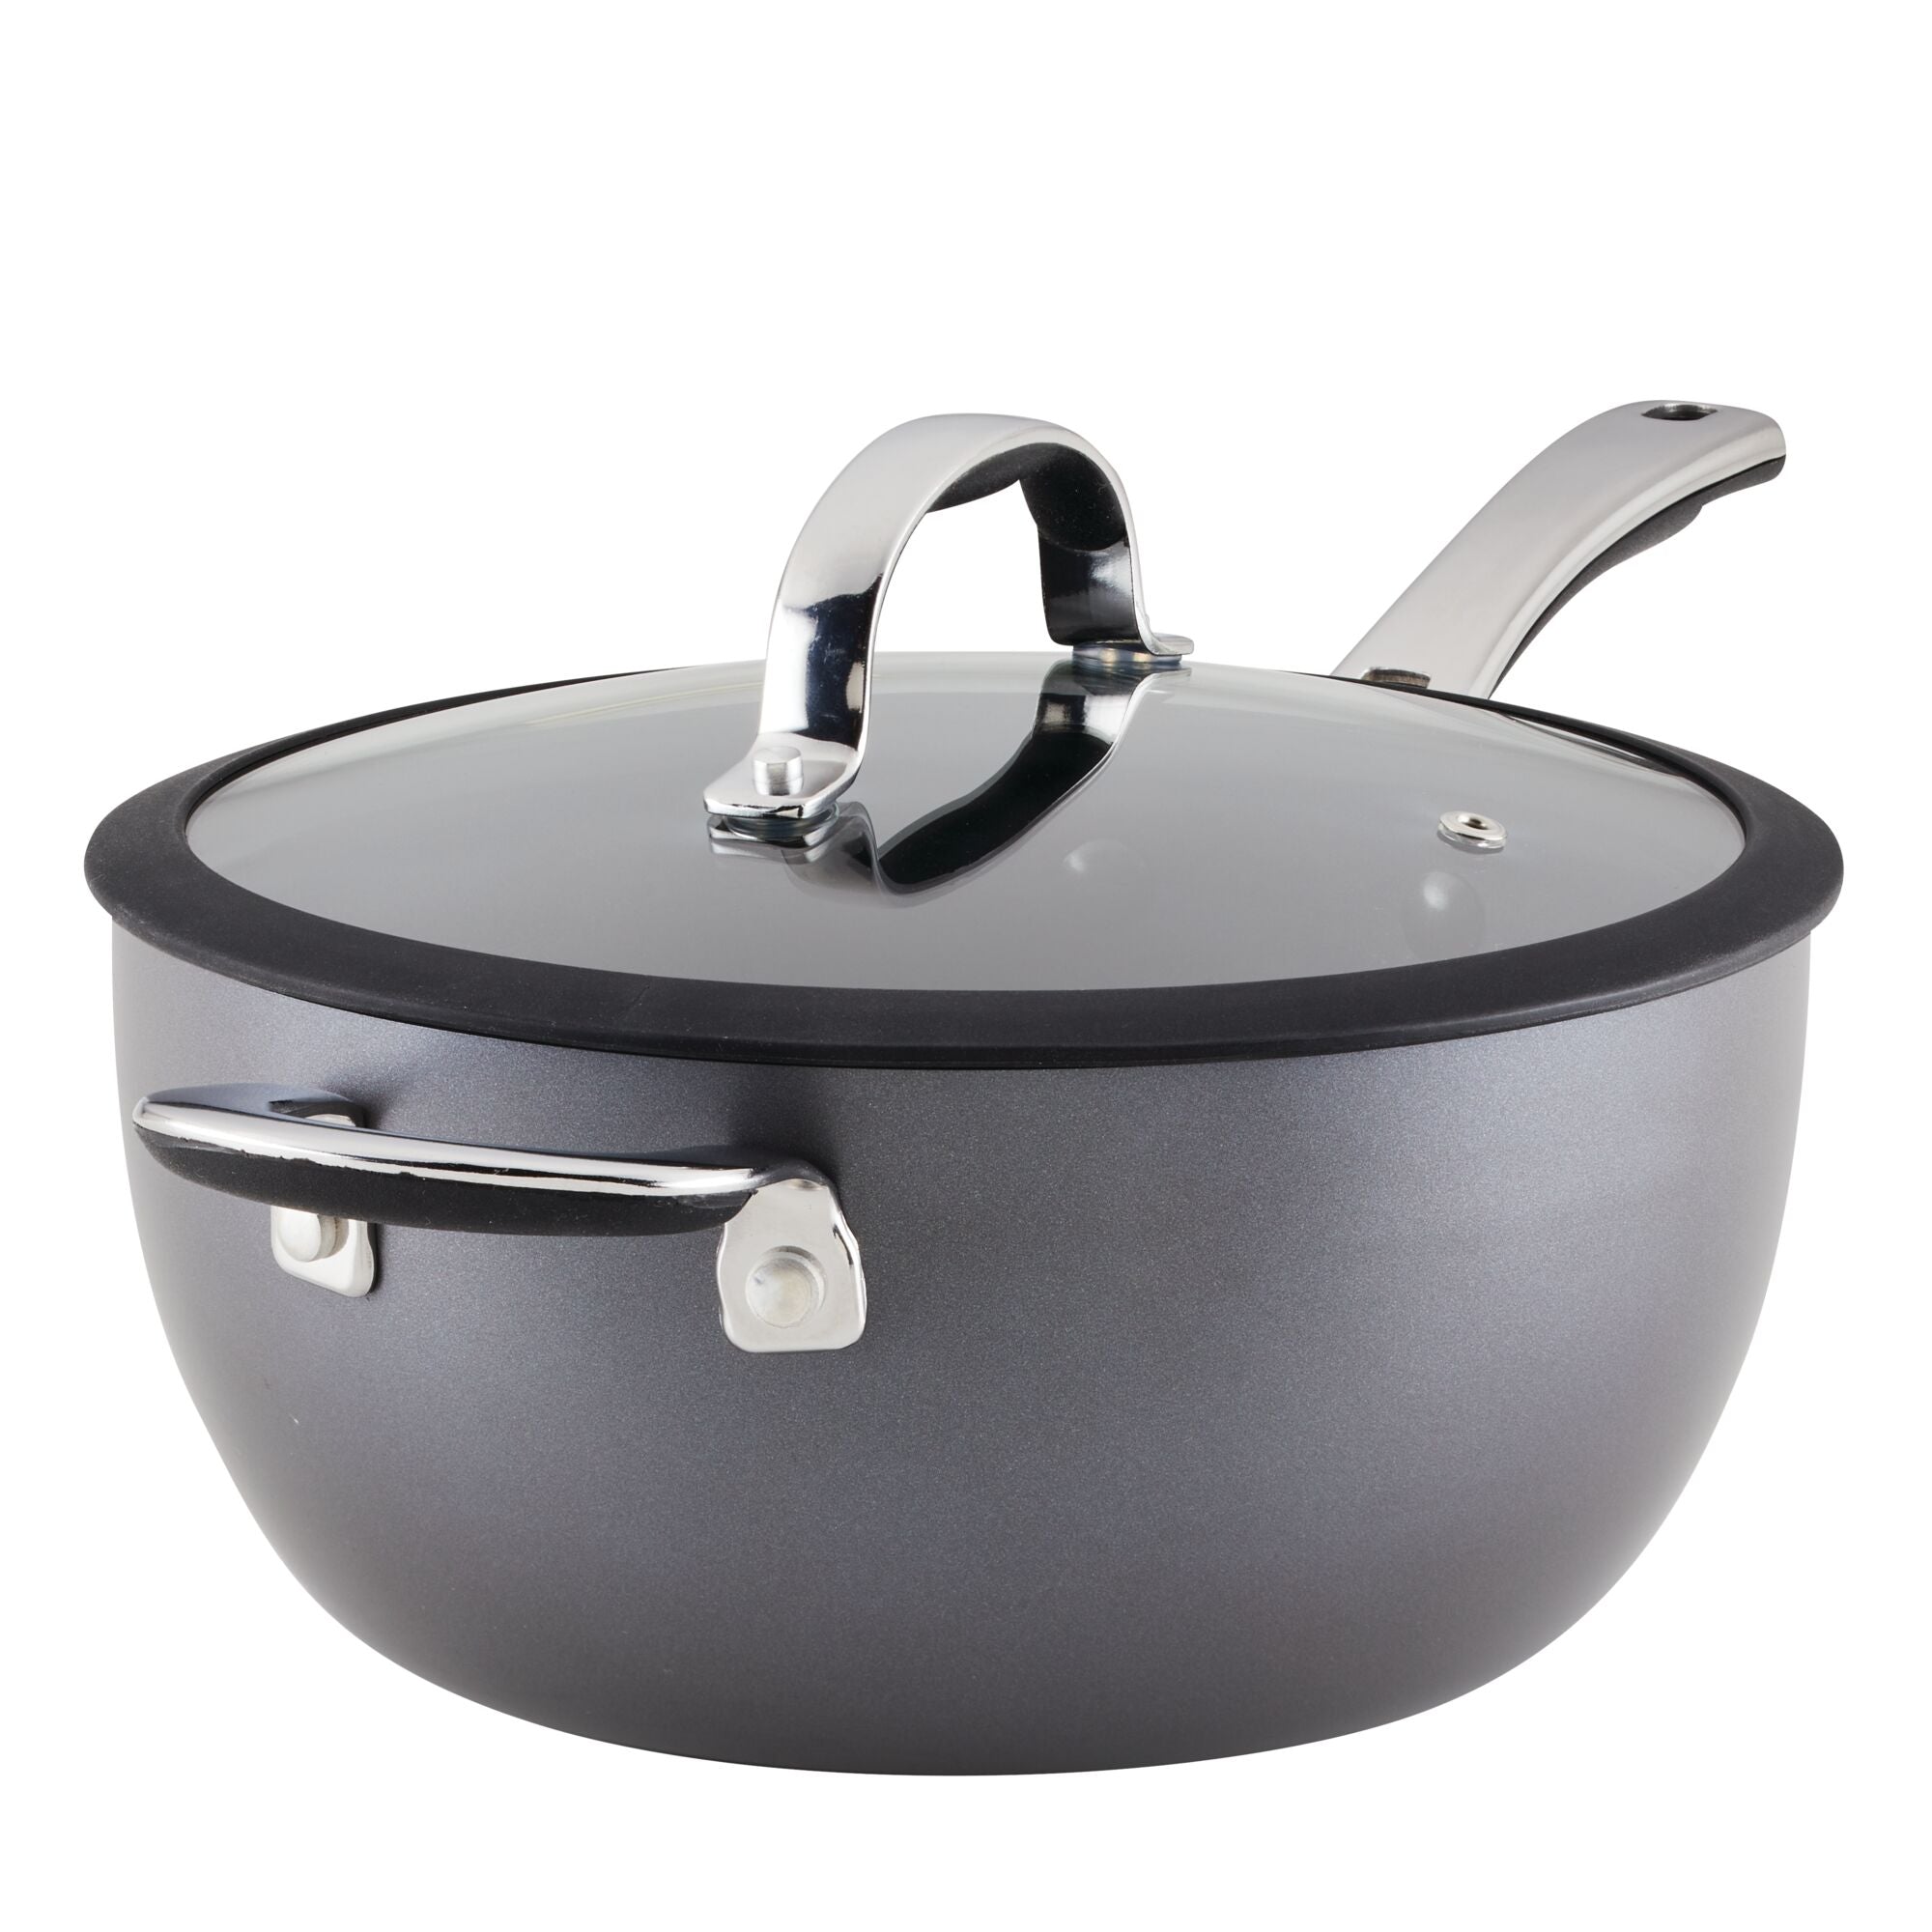 4.5-Quart Hard Anodized Nonstick Saucier Pan with Lid and Helper Handle